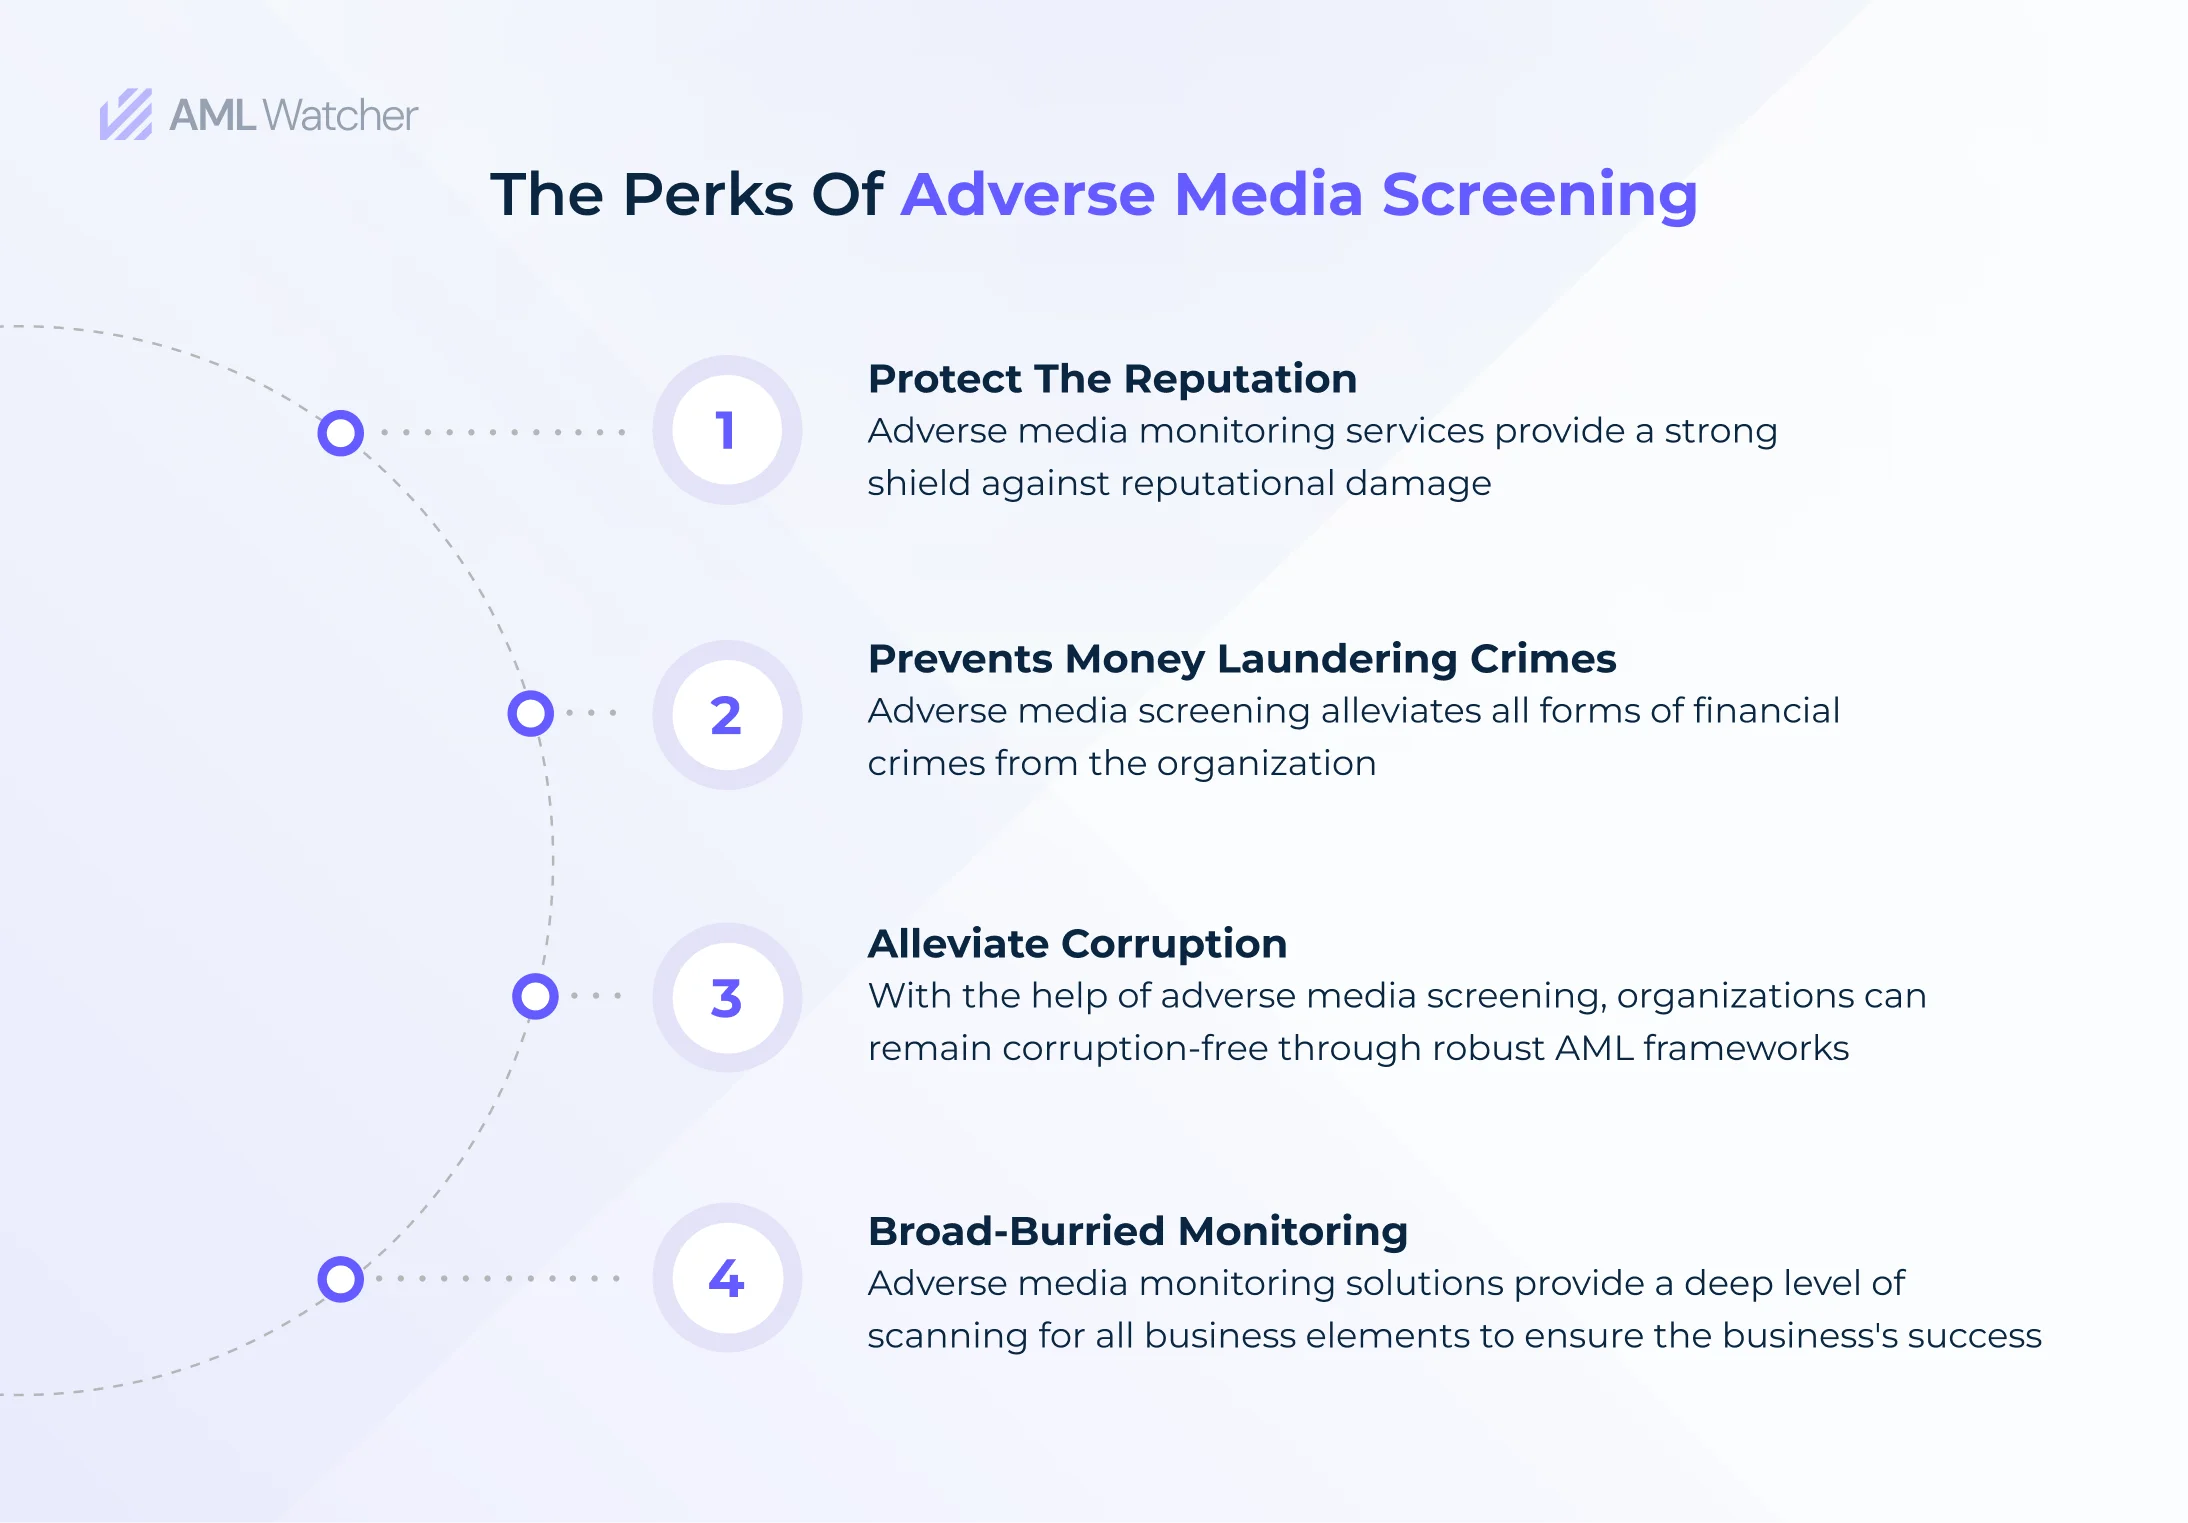 Adverse media screening provides a huge number of advantages to organizations along with protection.